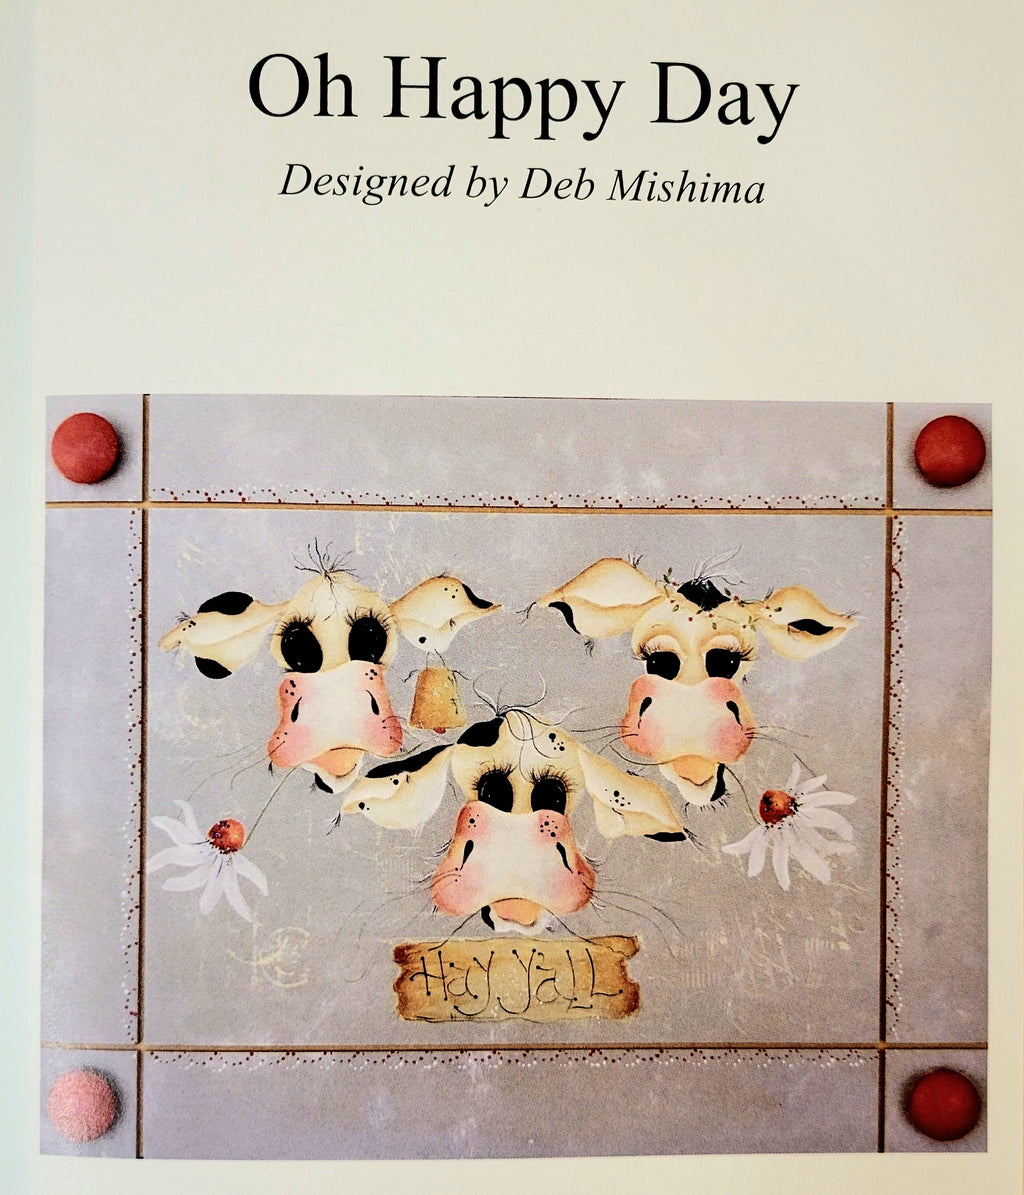 Oh Happy Day packet by Deb Mishima